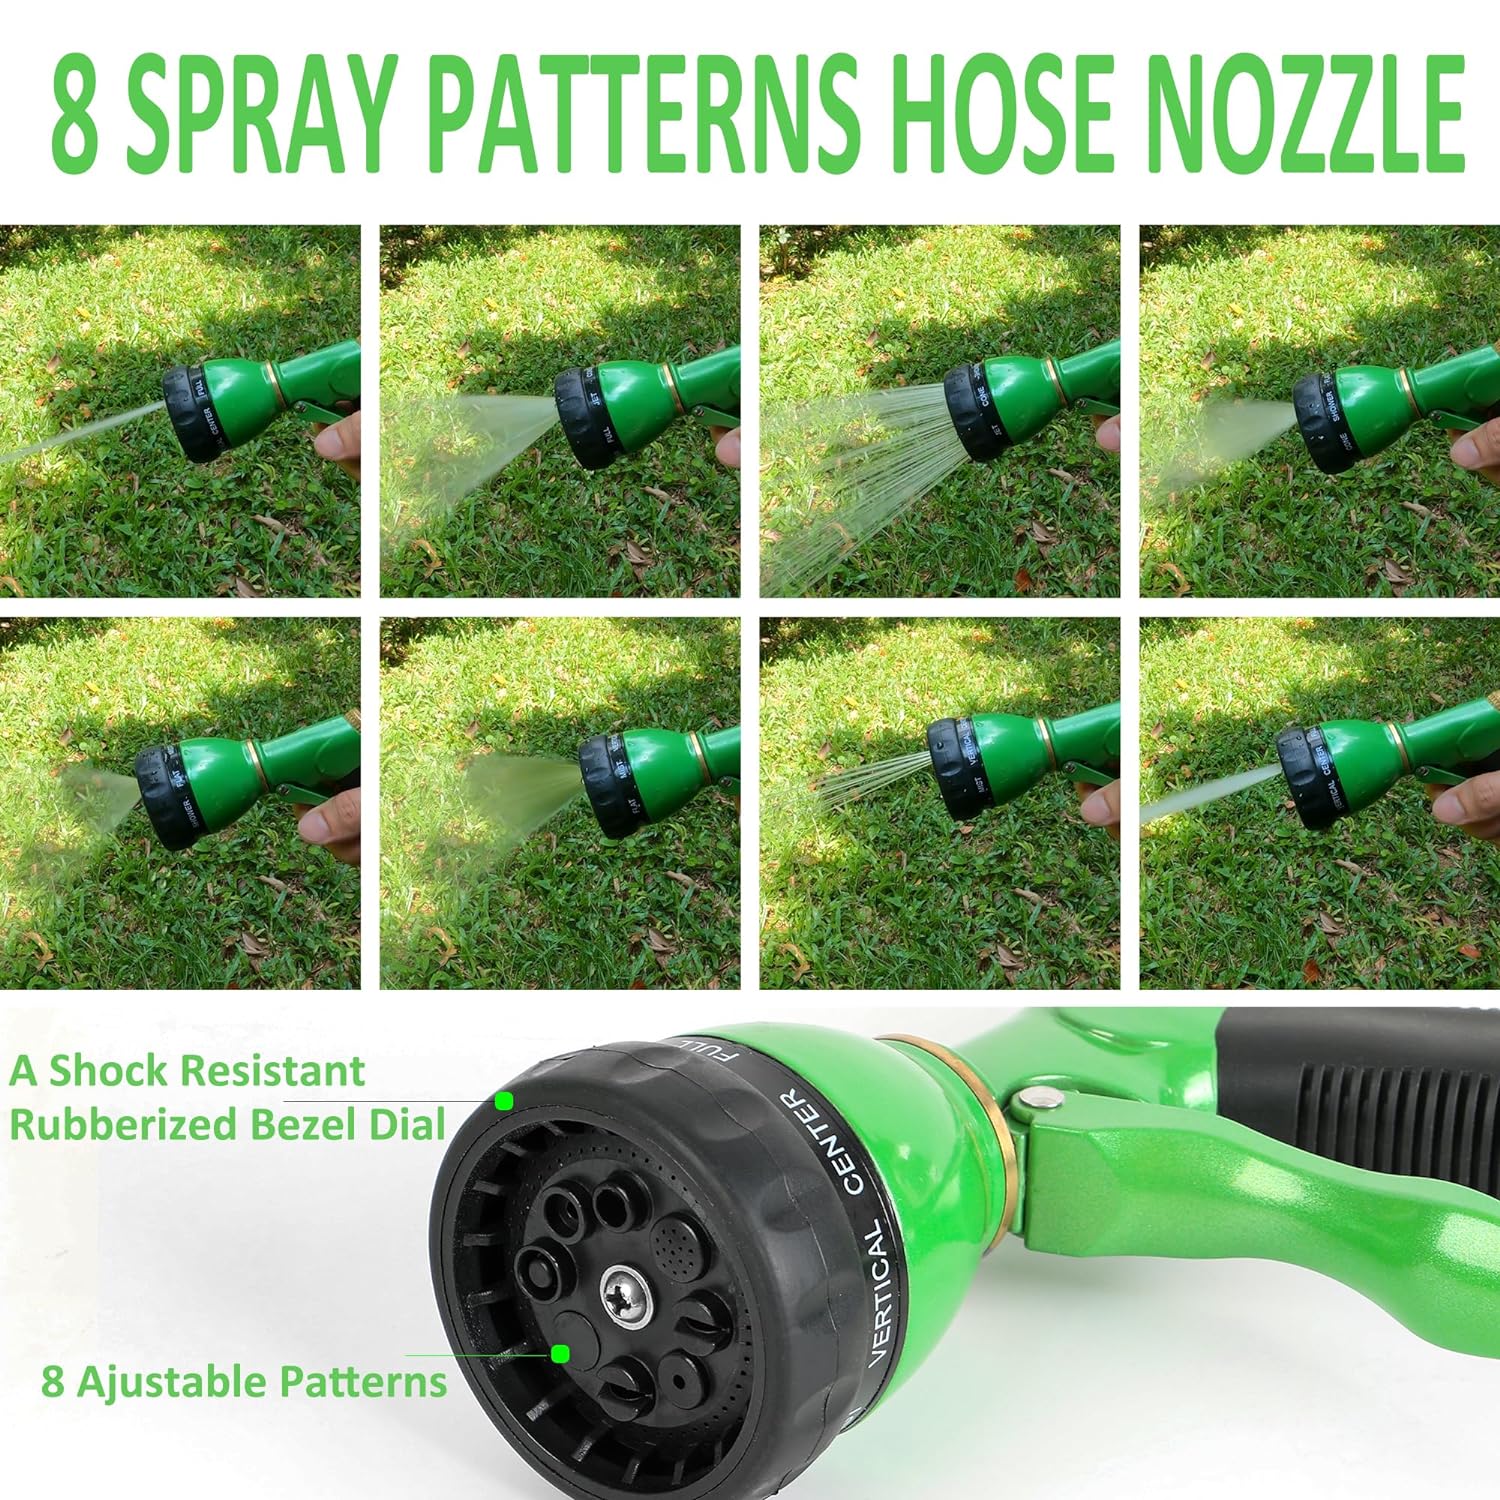 STYDDI 8-Pattern Garden Hose Nozzle Heavy Duty, Metal Water Hose Nozzle Sprayer, High Pressure Front Trigger Turret Hose Nozzle for Plant Watering, Car Washing, Window Cleaning, Pet Showering, Green